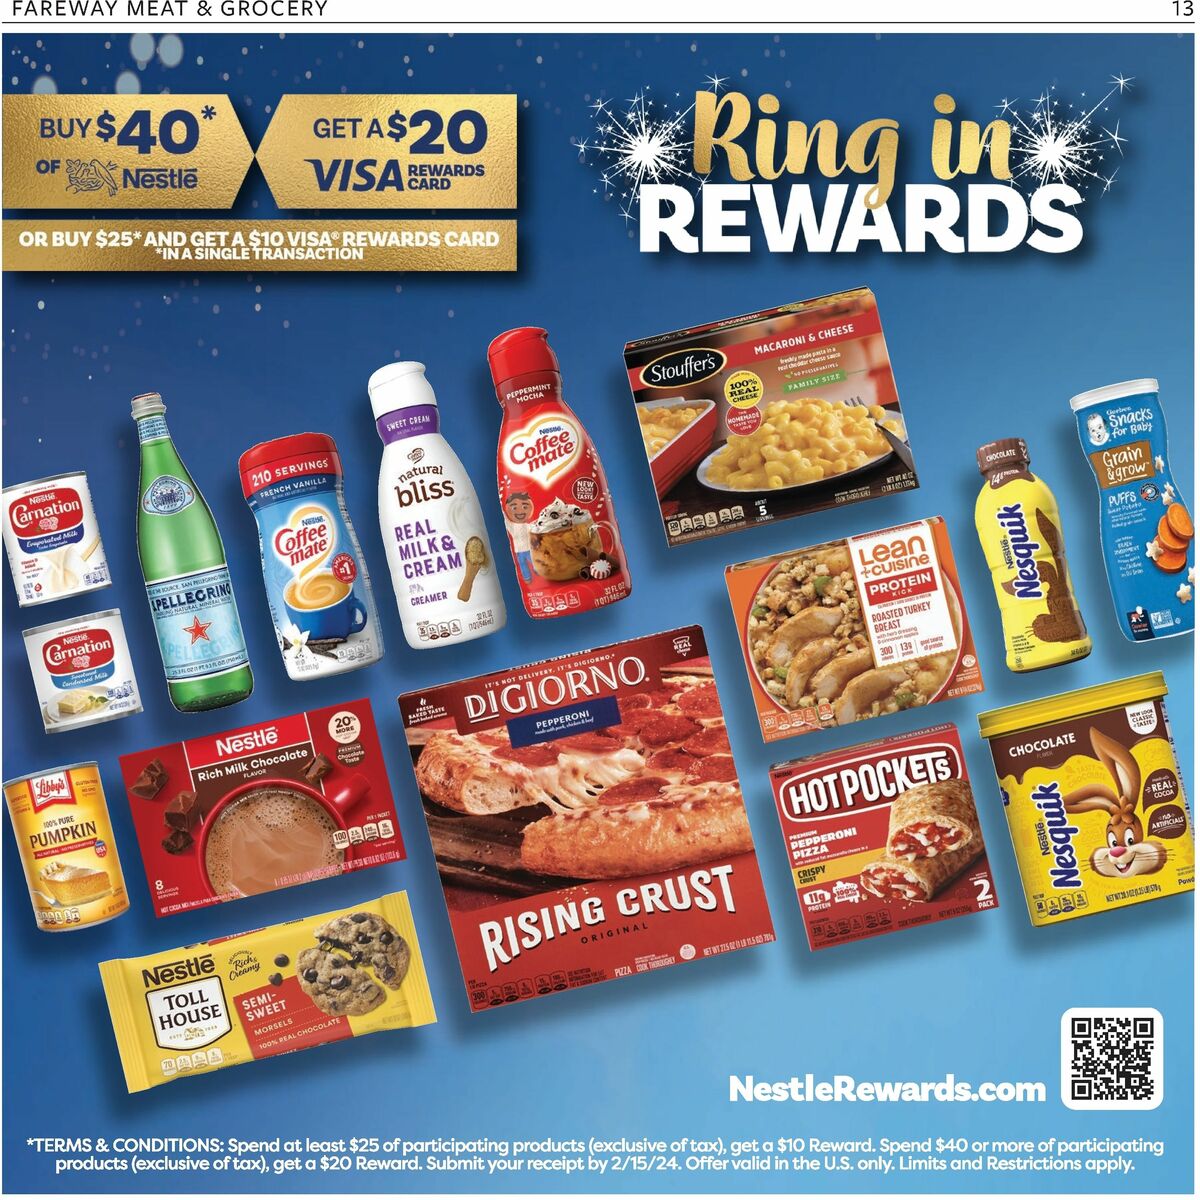 Fareway Weekly Ad from December 26